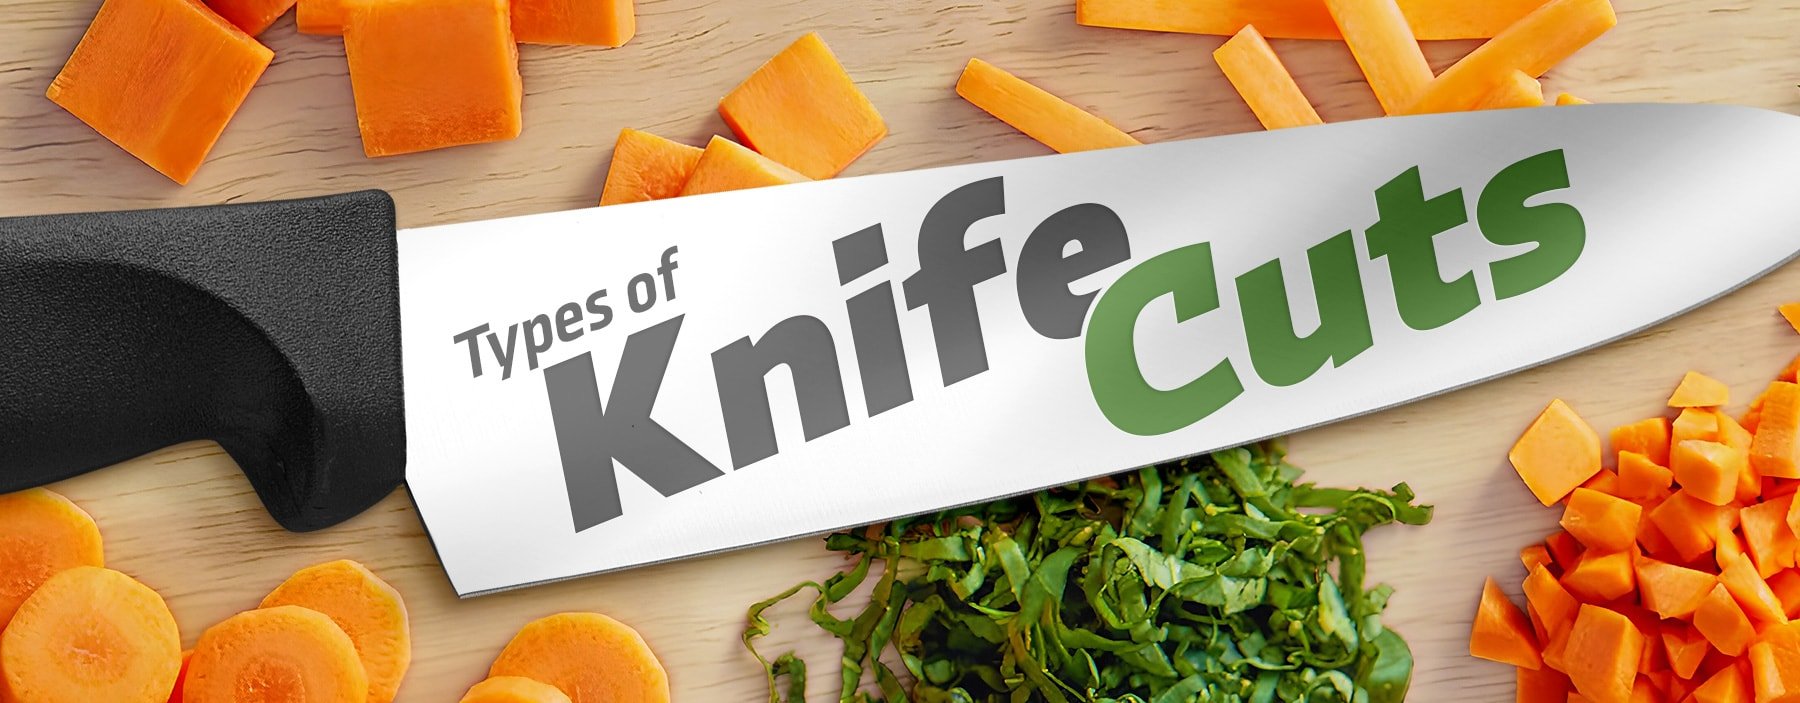 Knife Cut Guide: Dimensions, Names, & How To Video Demo